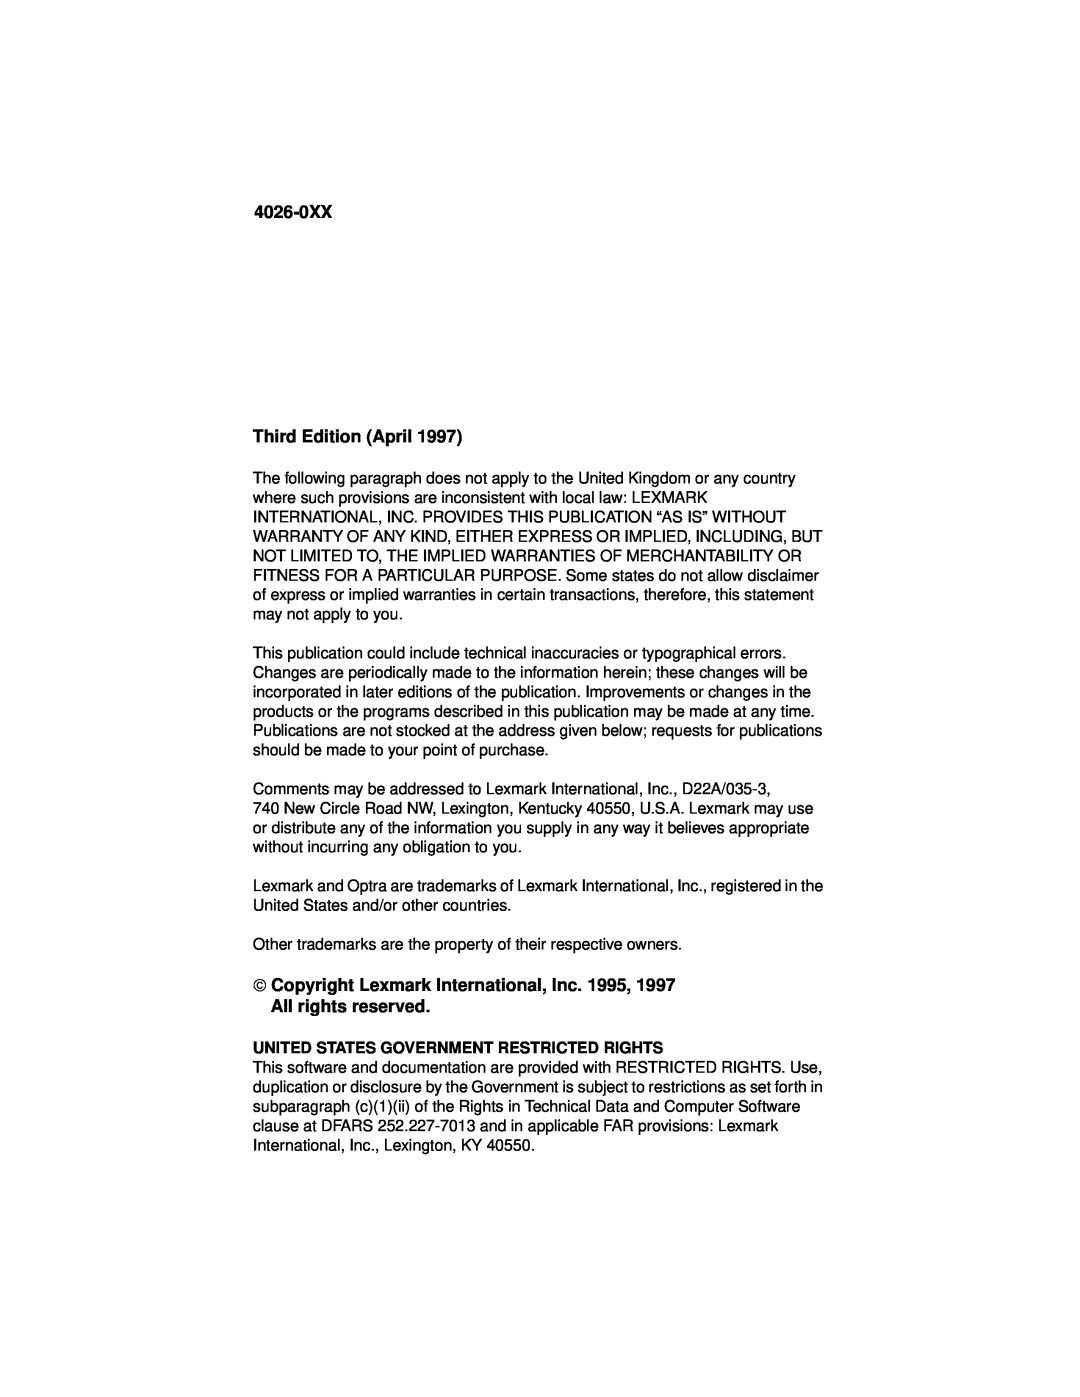 Lexmark OptraTM manual 4026-0XX Third Edition April, United States Government Restricted Rights 